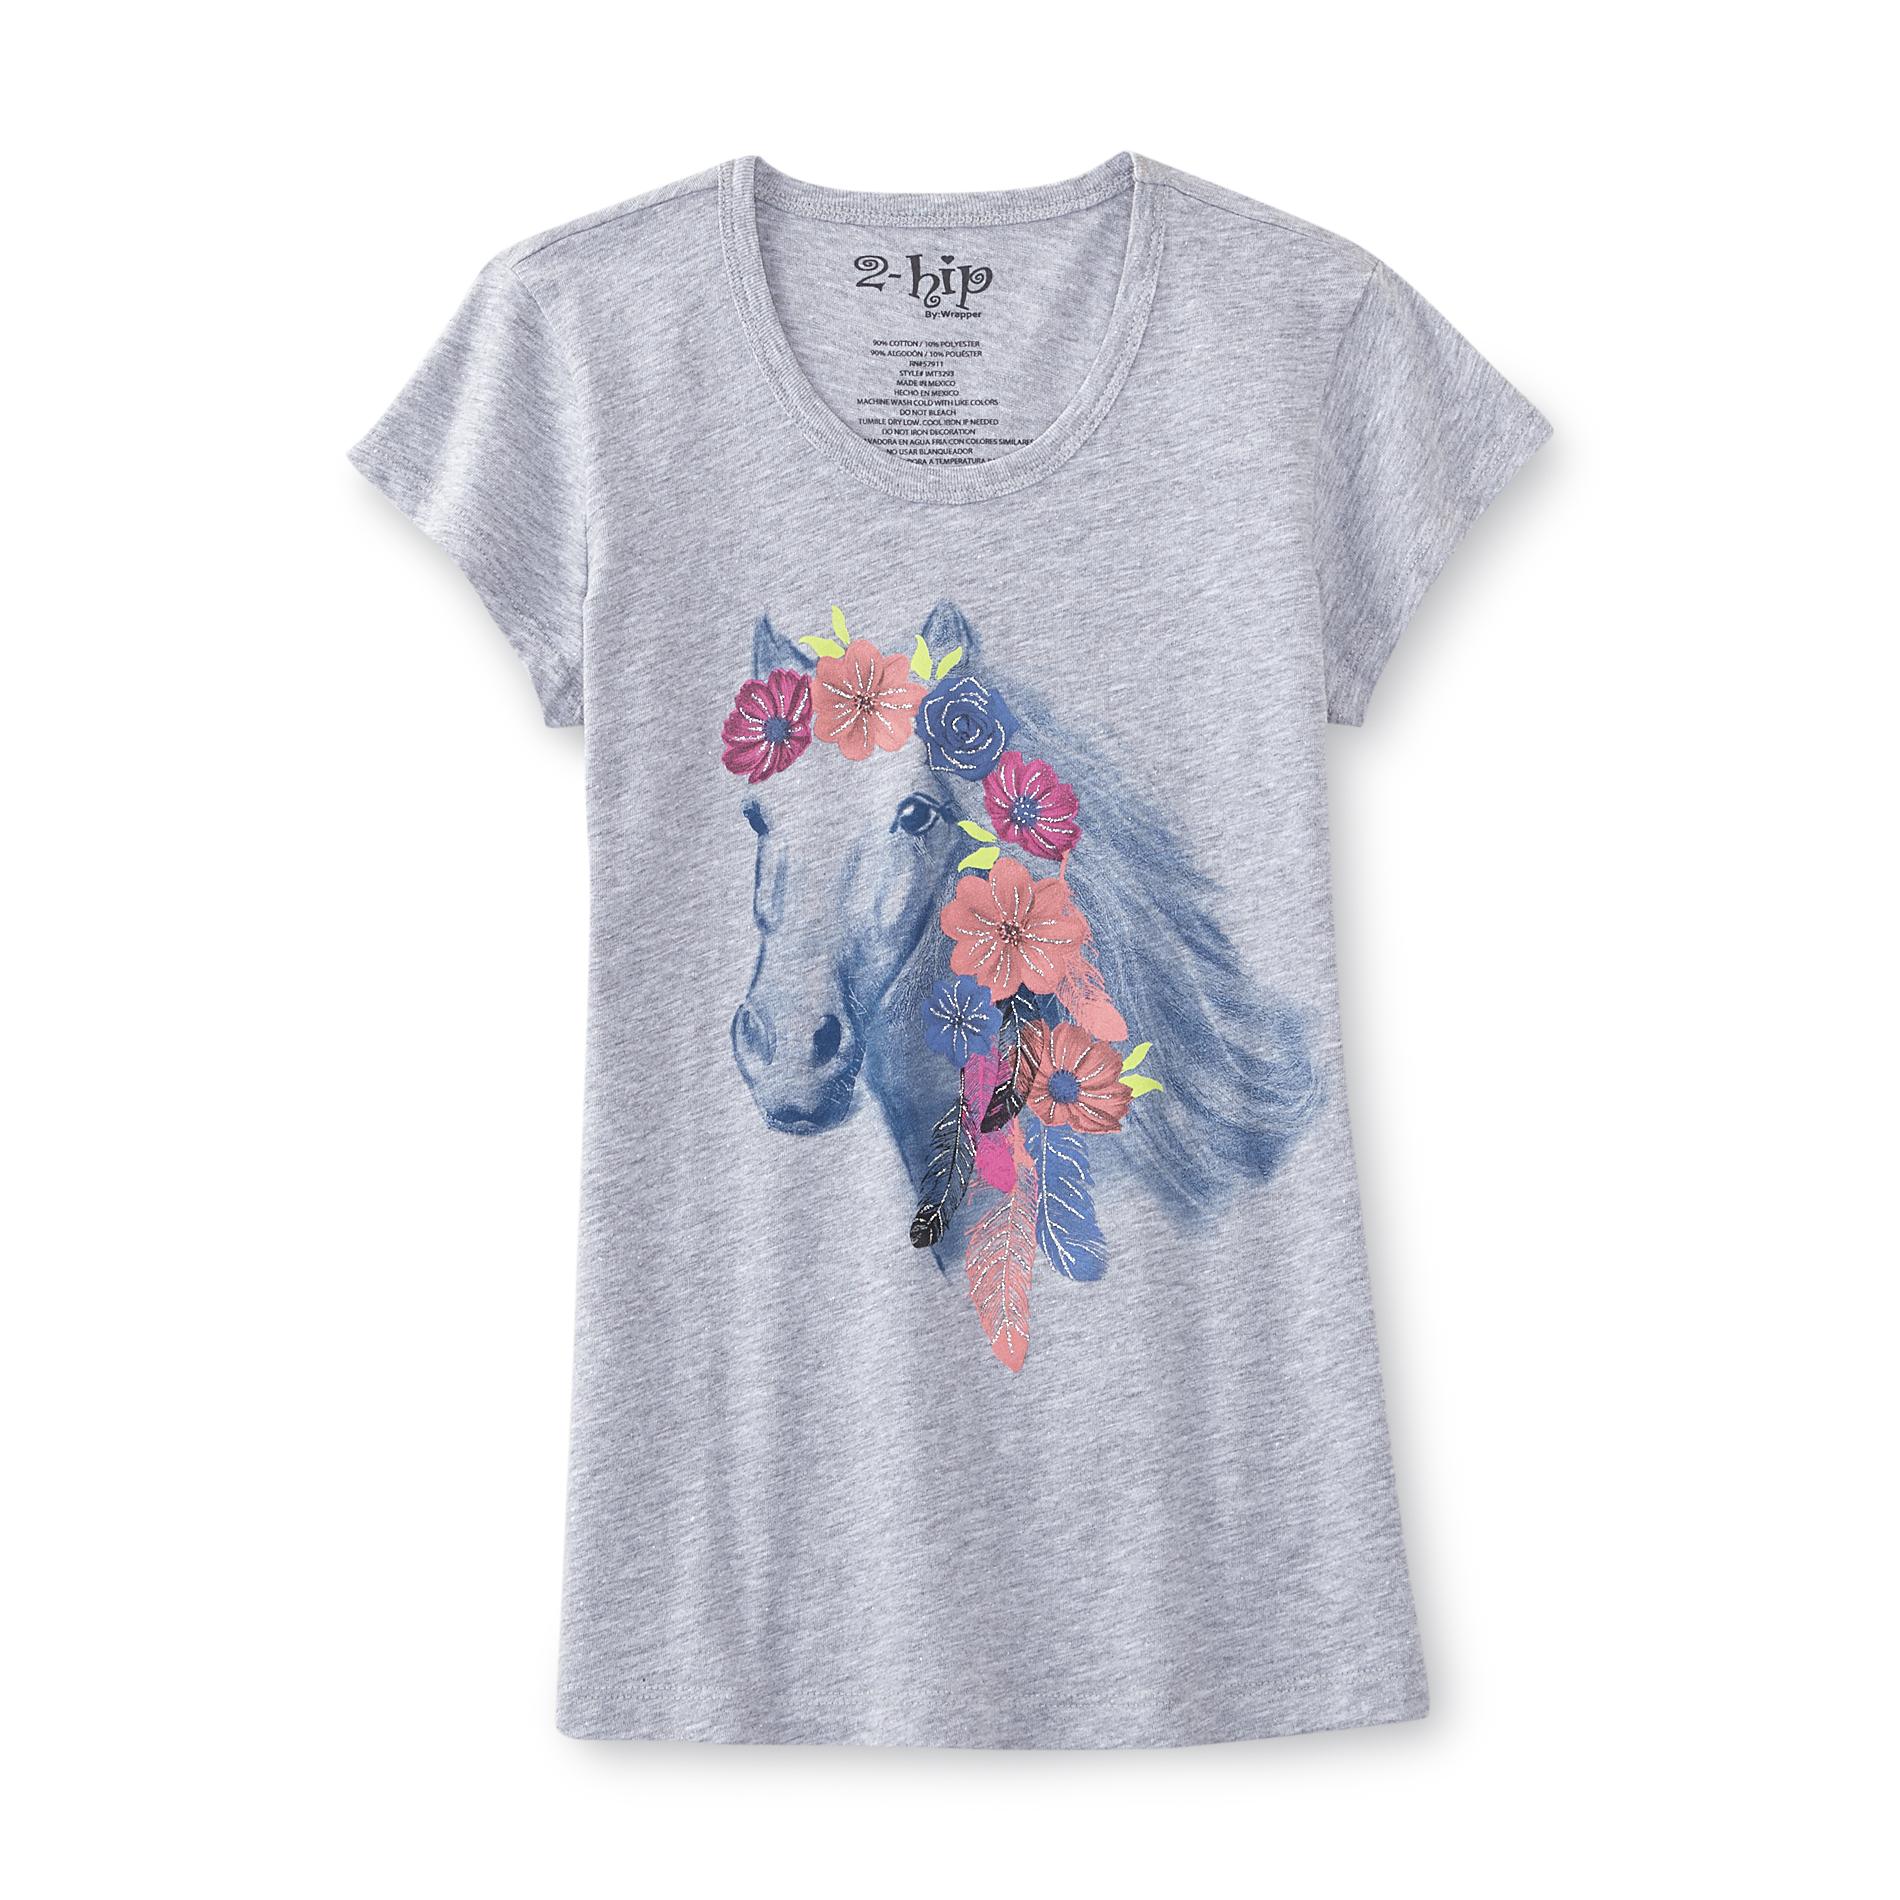 Wrapper Girl's Graphic T-Shirt - Horse